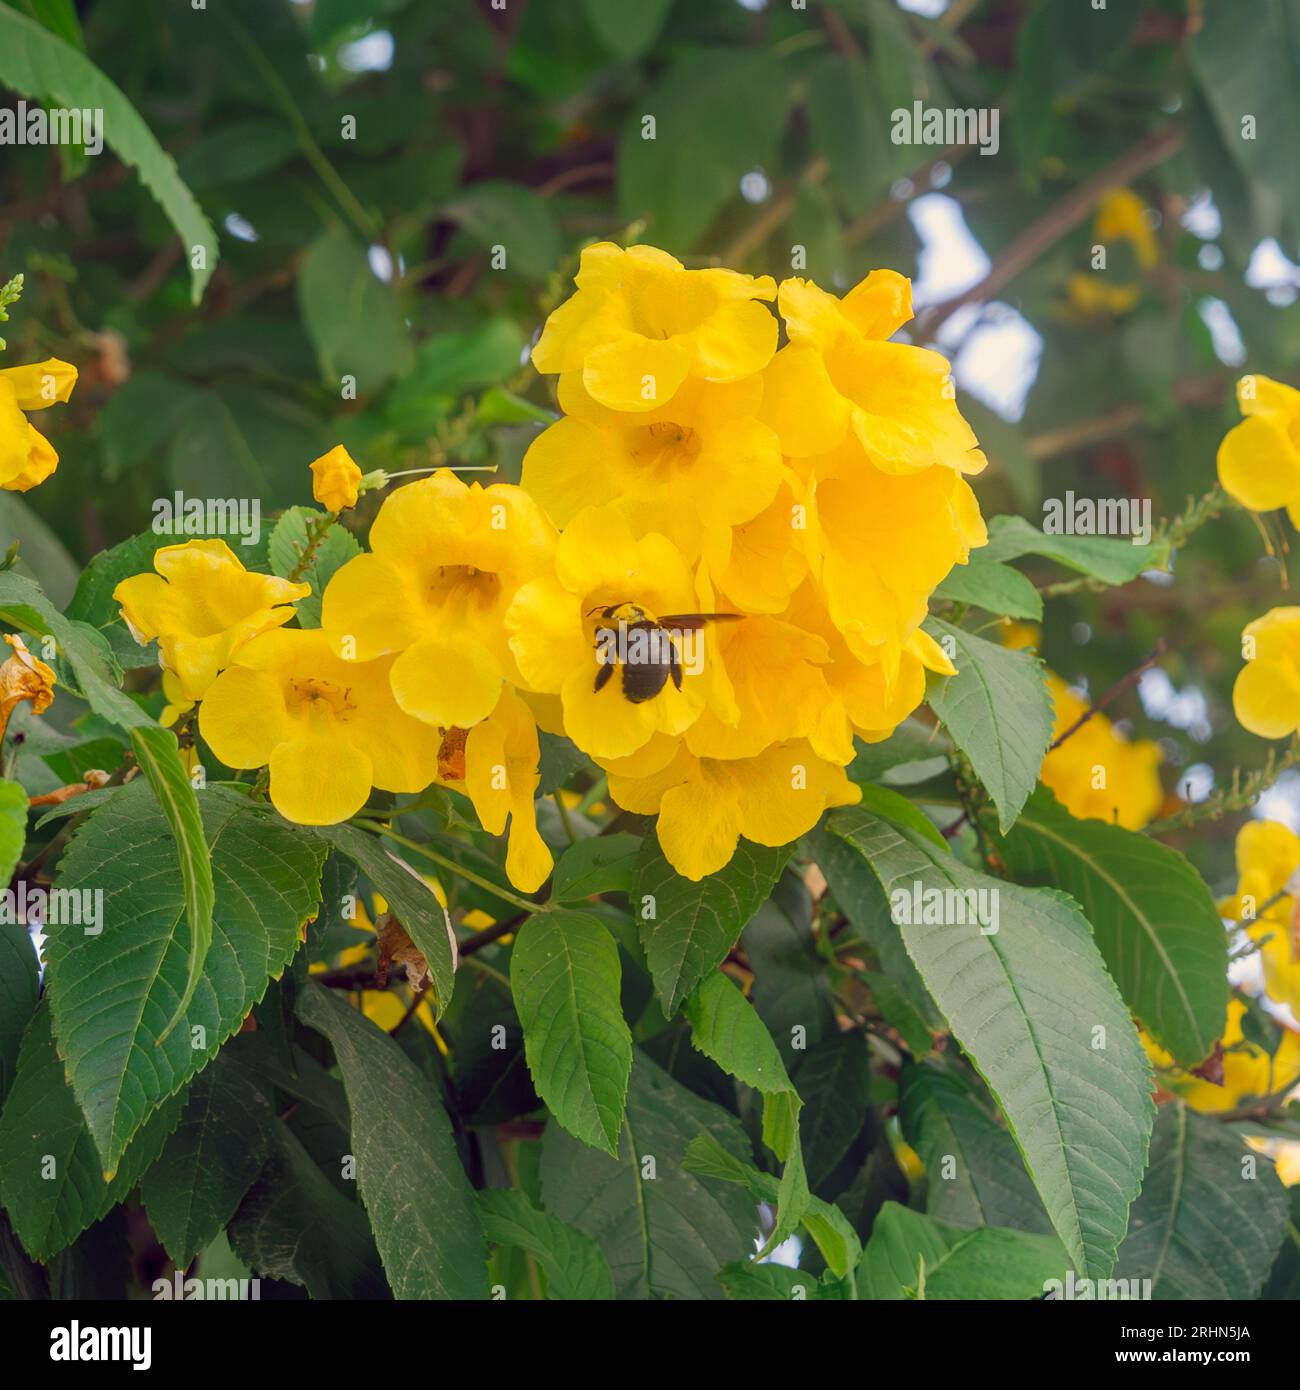 a bumble bee visiting a yellow trumpet tree Tecoma stans is a species of flowering perennial shrub in the trumpet vine family, Bignoniaceae, that is n Stock Photo